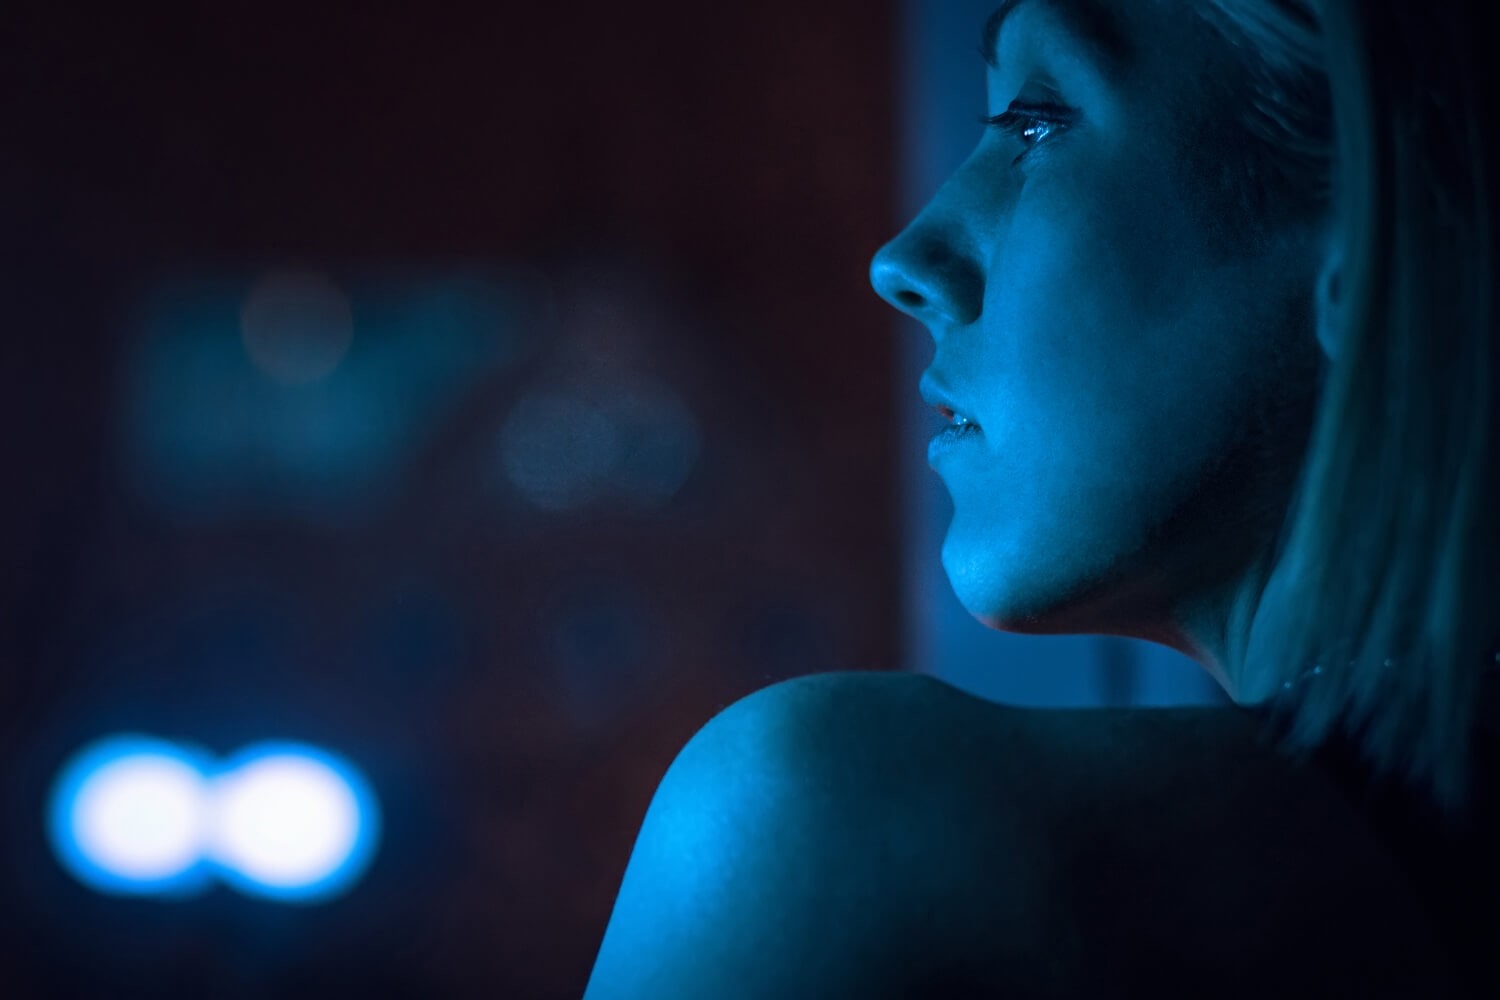 Sideview of a woman's face at night